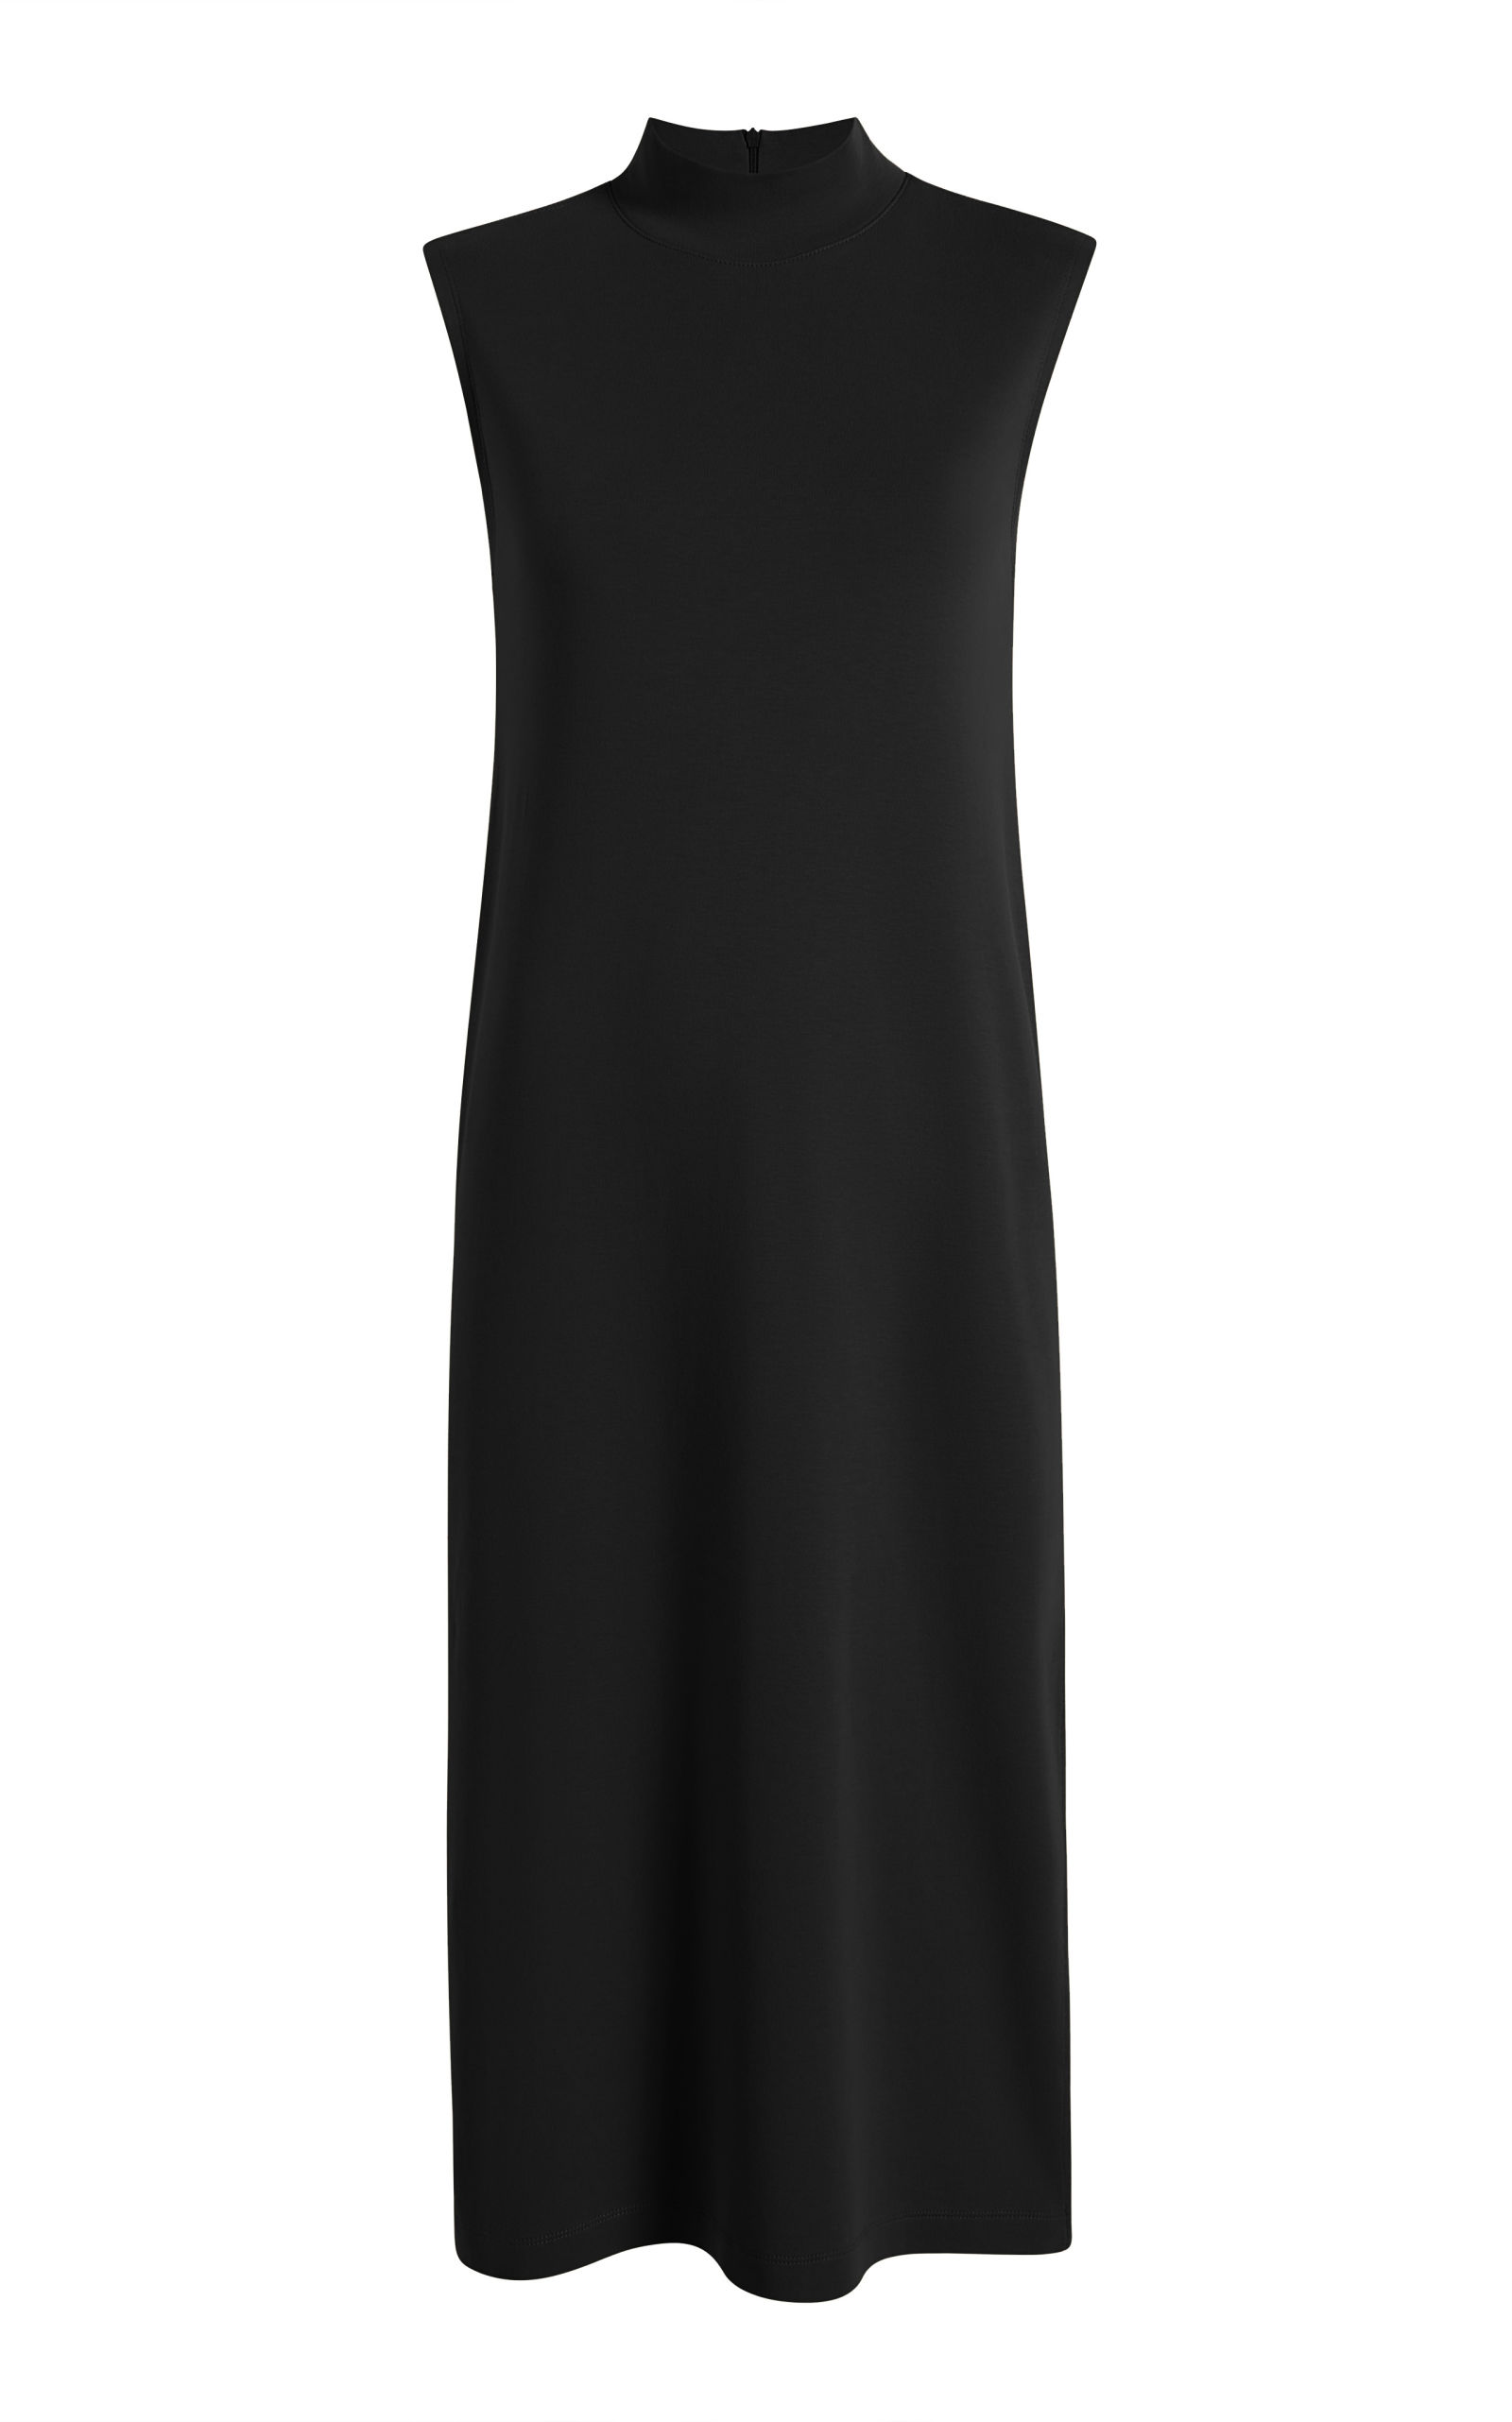 LUXE SEAMED DRESS BLACK A123CT035-CO-BLK